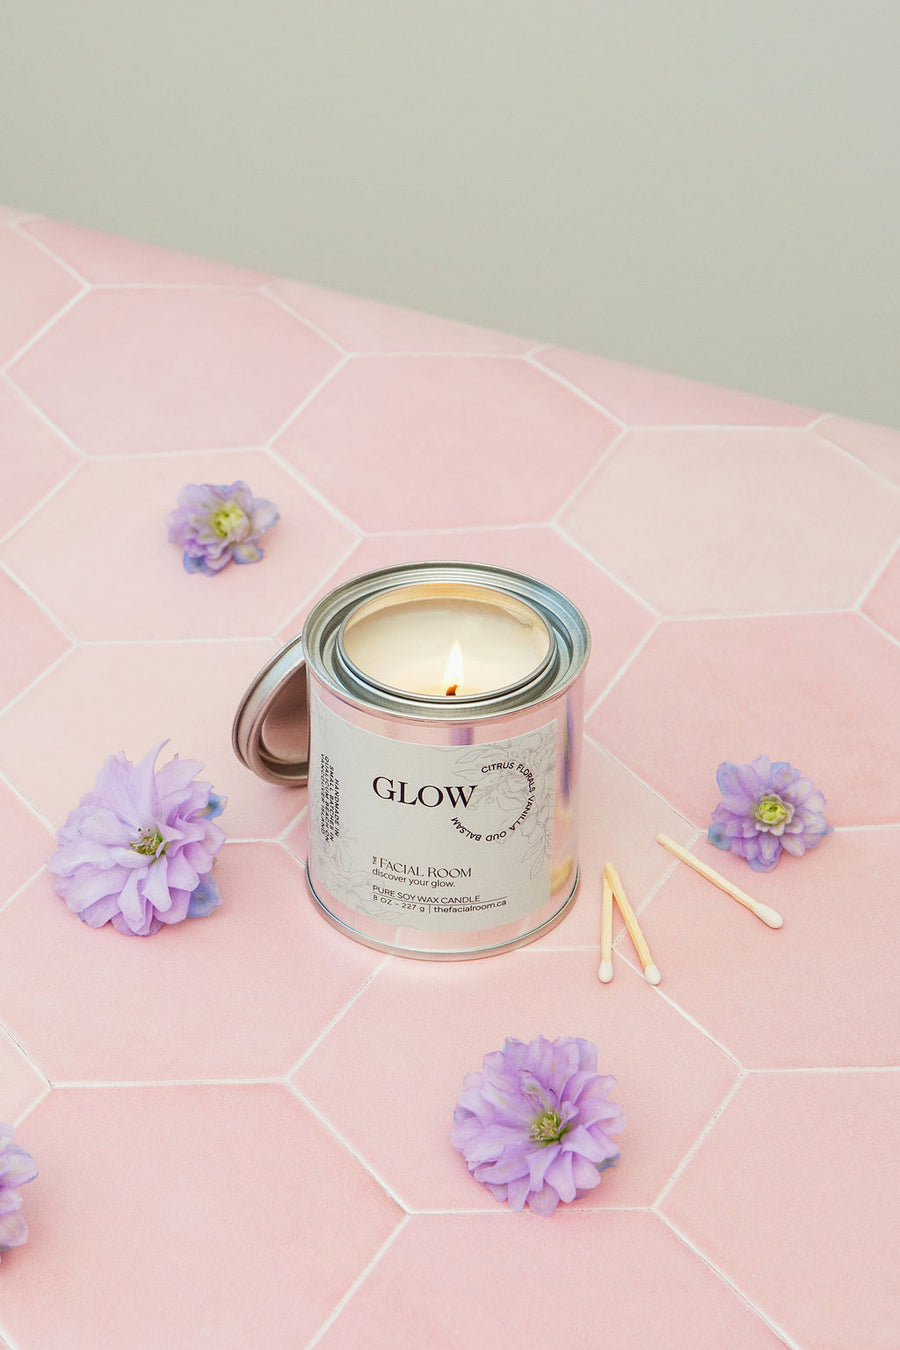 The Facial Room Glow Candle